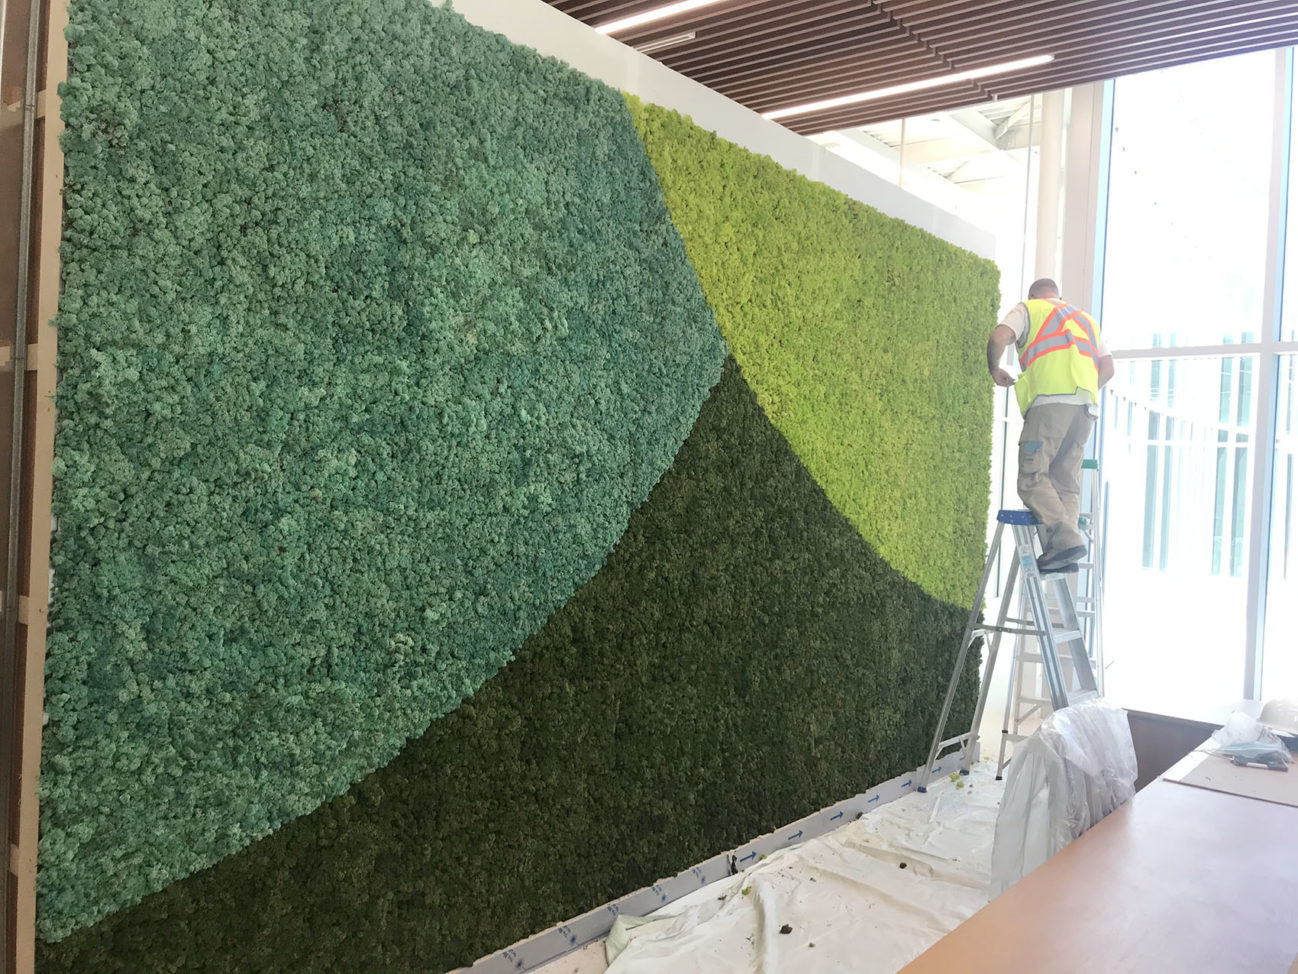 Installing the preserved moss wall